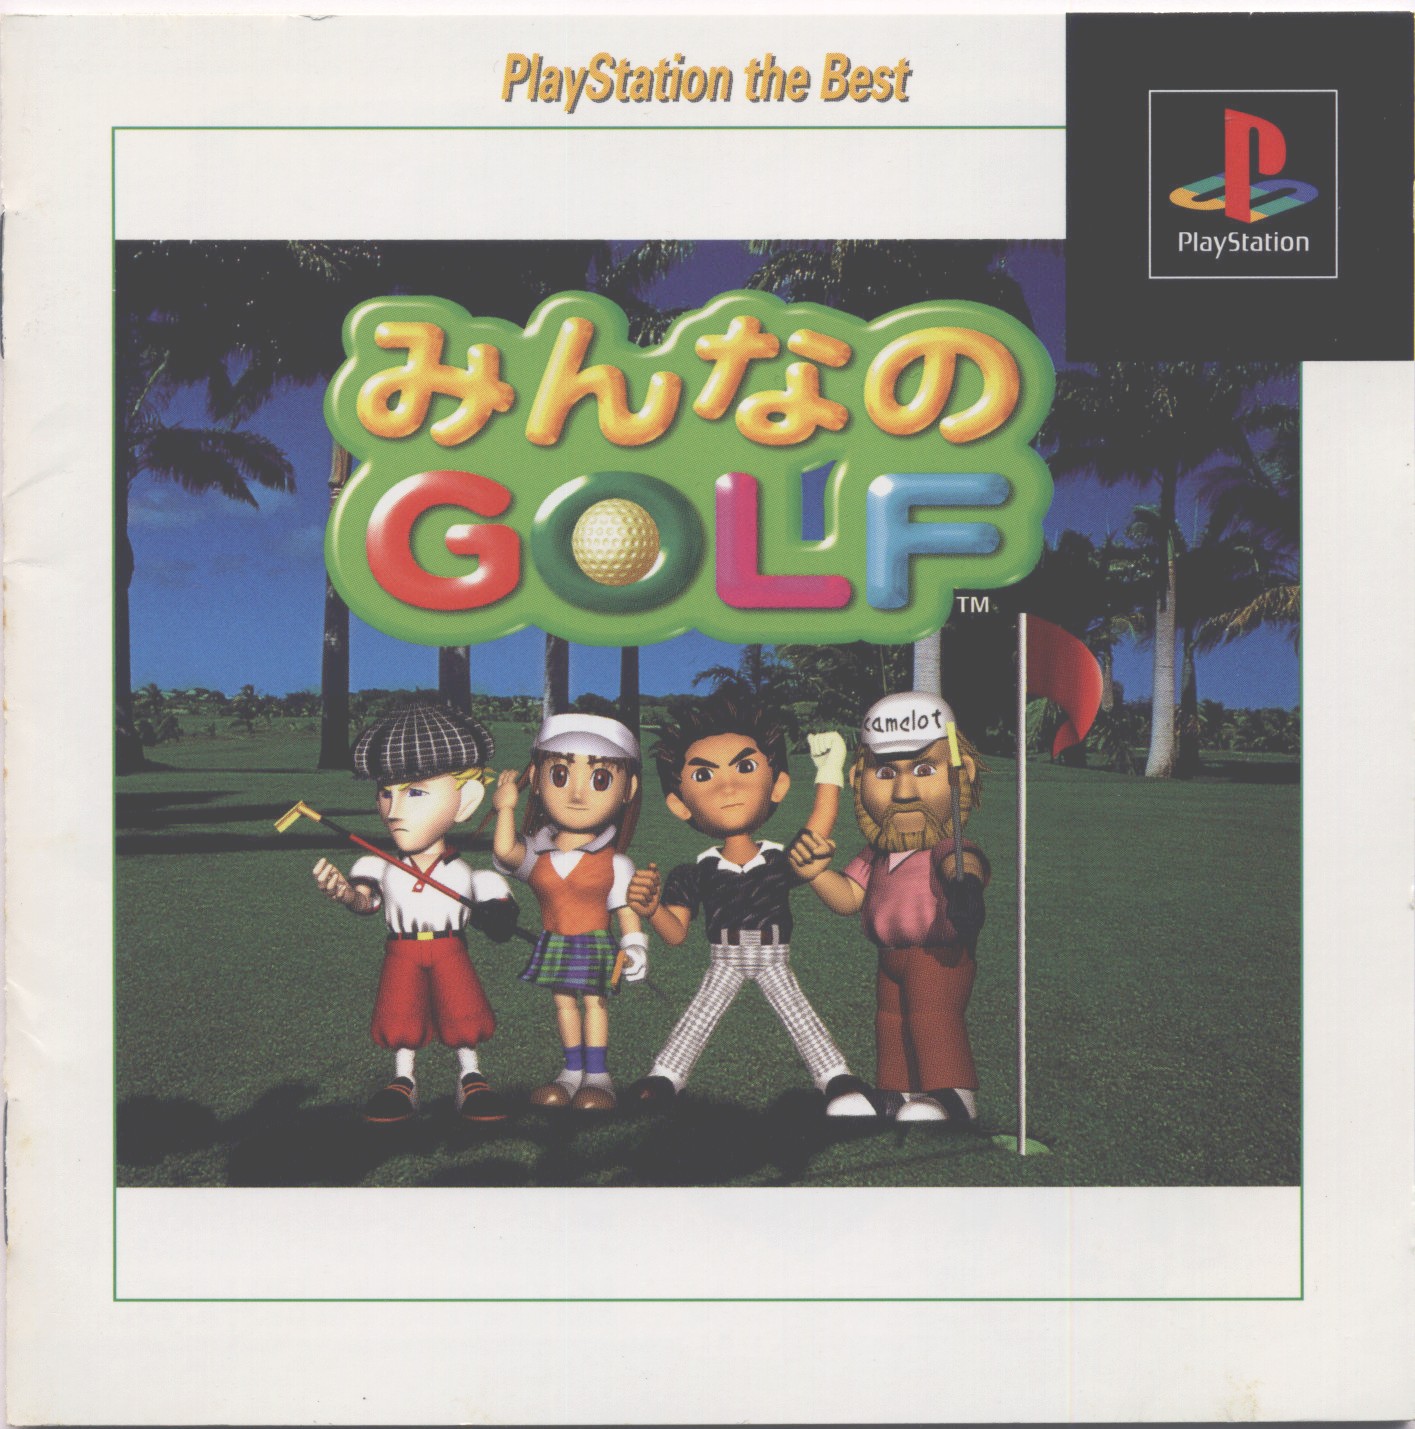 Minna No Golf [Playstation The Best] PSX cover